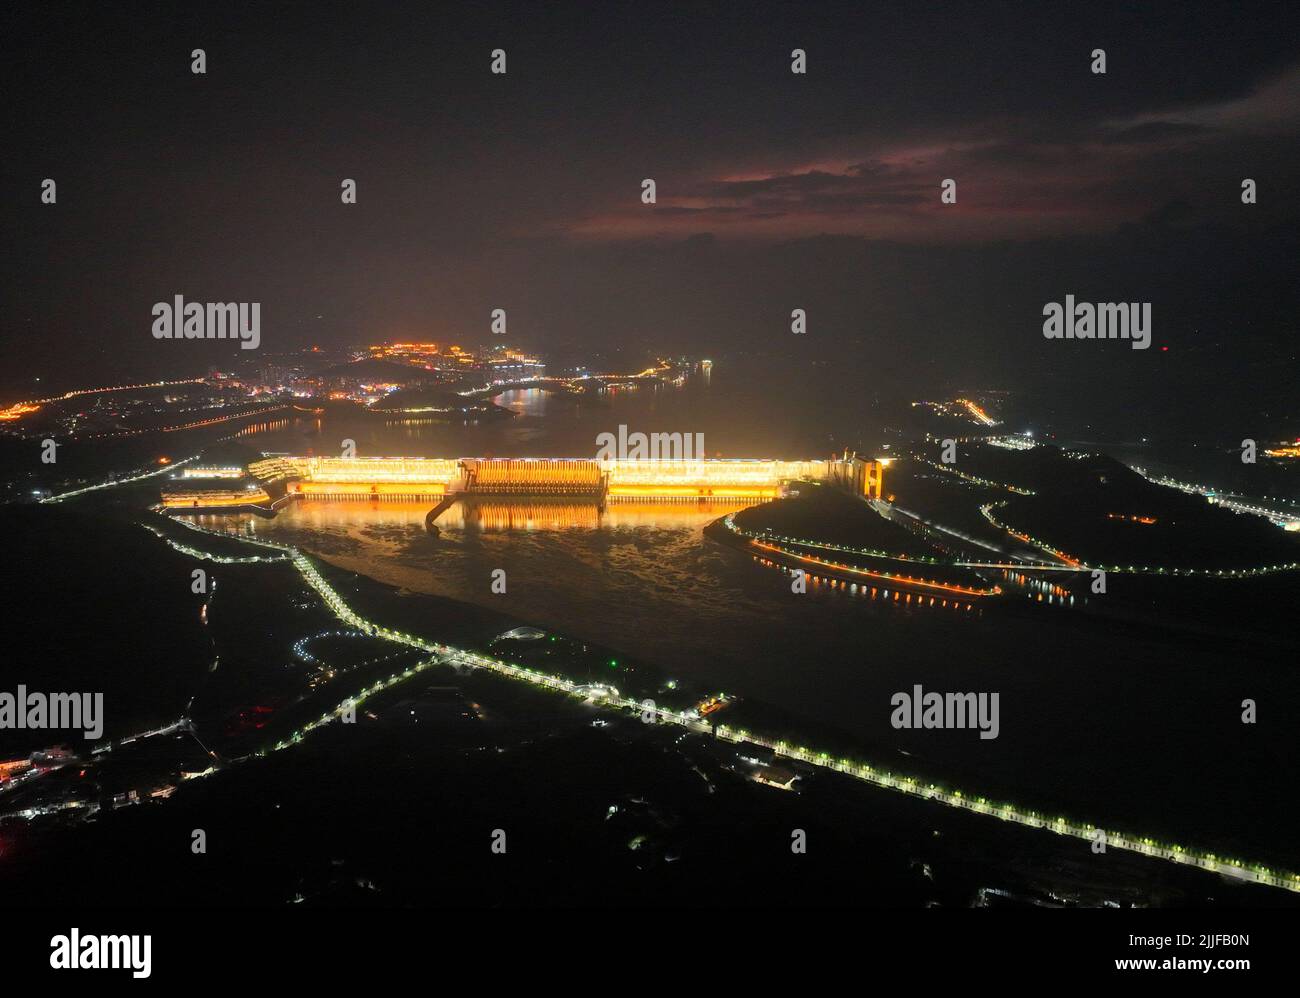 YICHANG, CHINA - JULY 25, 2022 - An aerial photo shows the night view of the Three Gorges Dam in Yichang, Hubei province, China, July 25, 2022. In 201 Stock Photo